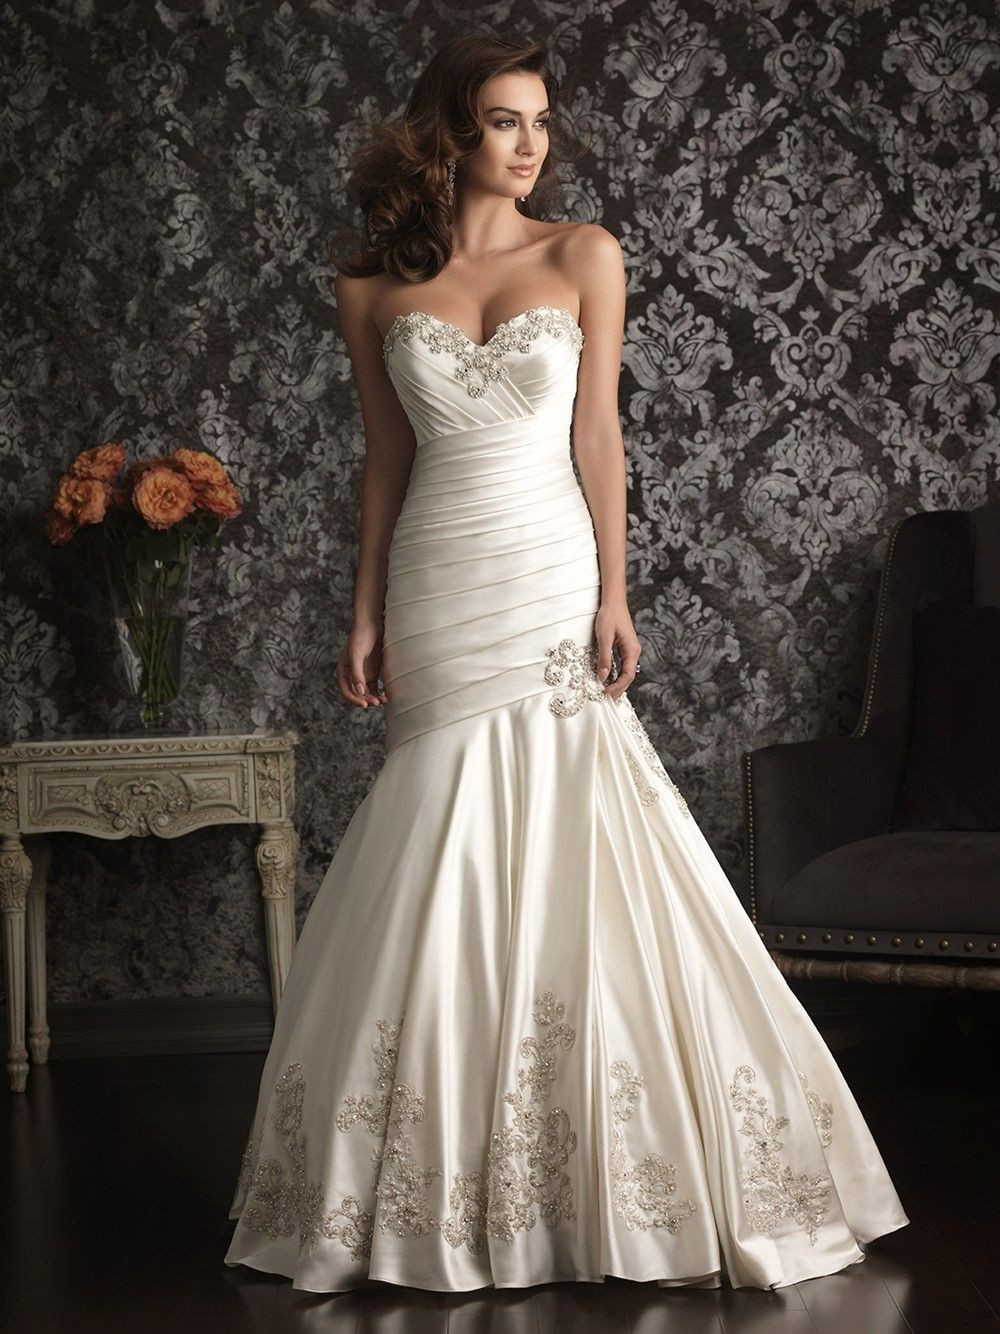 Ruched Wedding Gowns
 Mermaid Sweetheart Satin Ruched Wedding Dress With